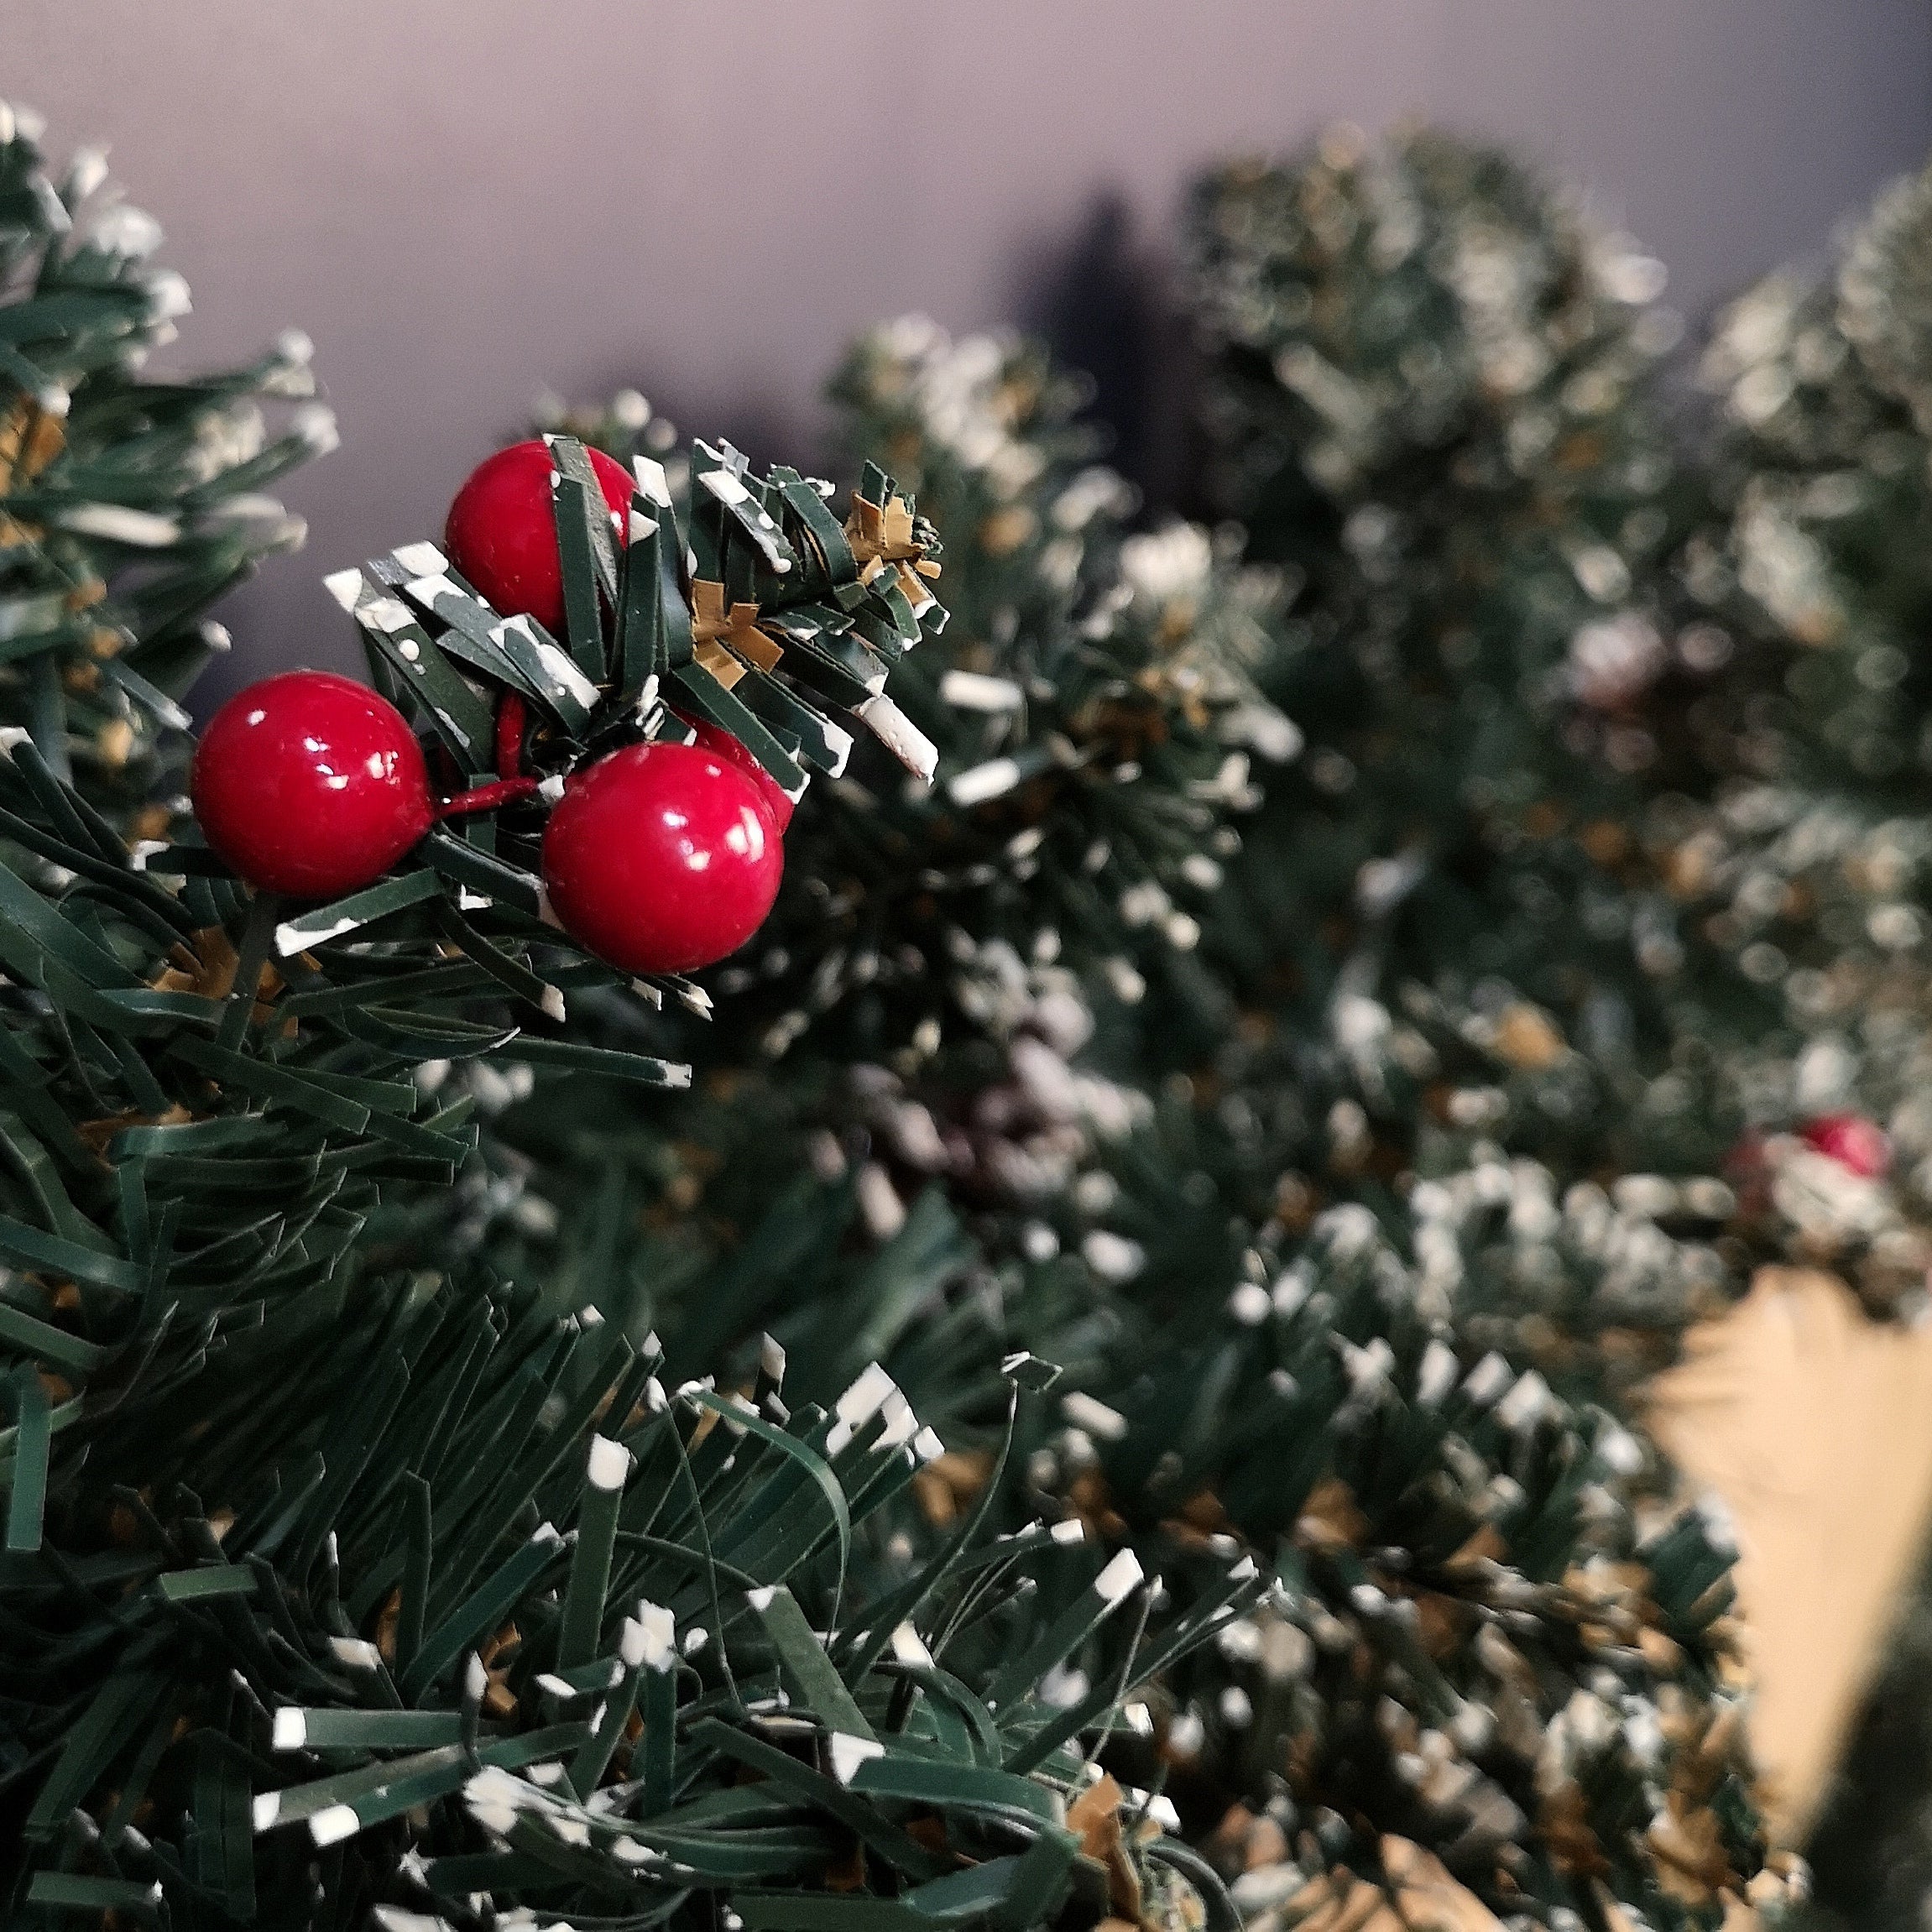 2.7m Green Christmas Garland with Pine Cones and Red Berries